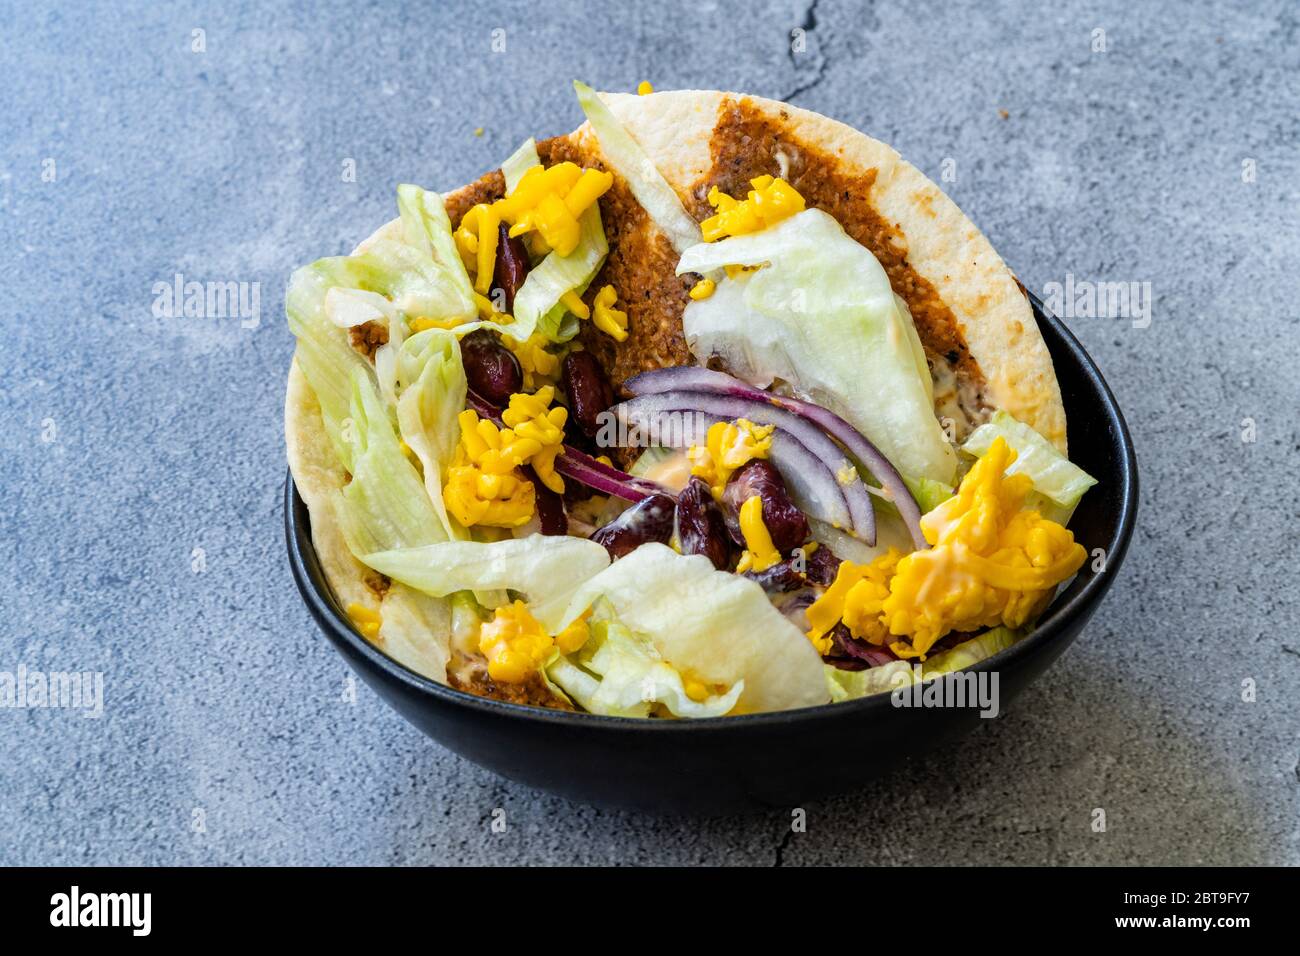 Turkish Mexican Style Taco Cig Kofte with Kidney Beans, Red Onions, Grated Cheddar Cheese and Pomegranate Syrup Sauce. Traditional Fast Food. Stock Photo